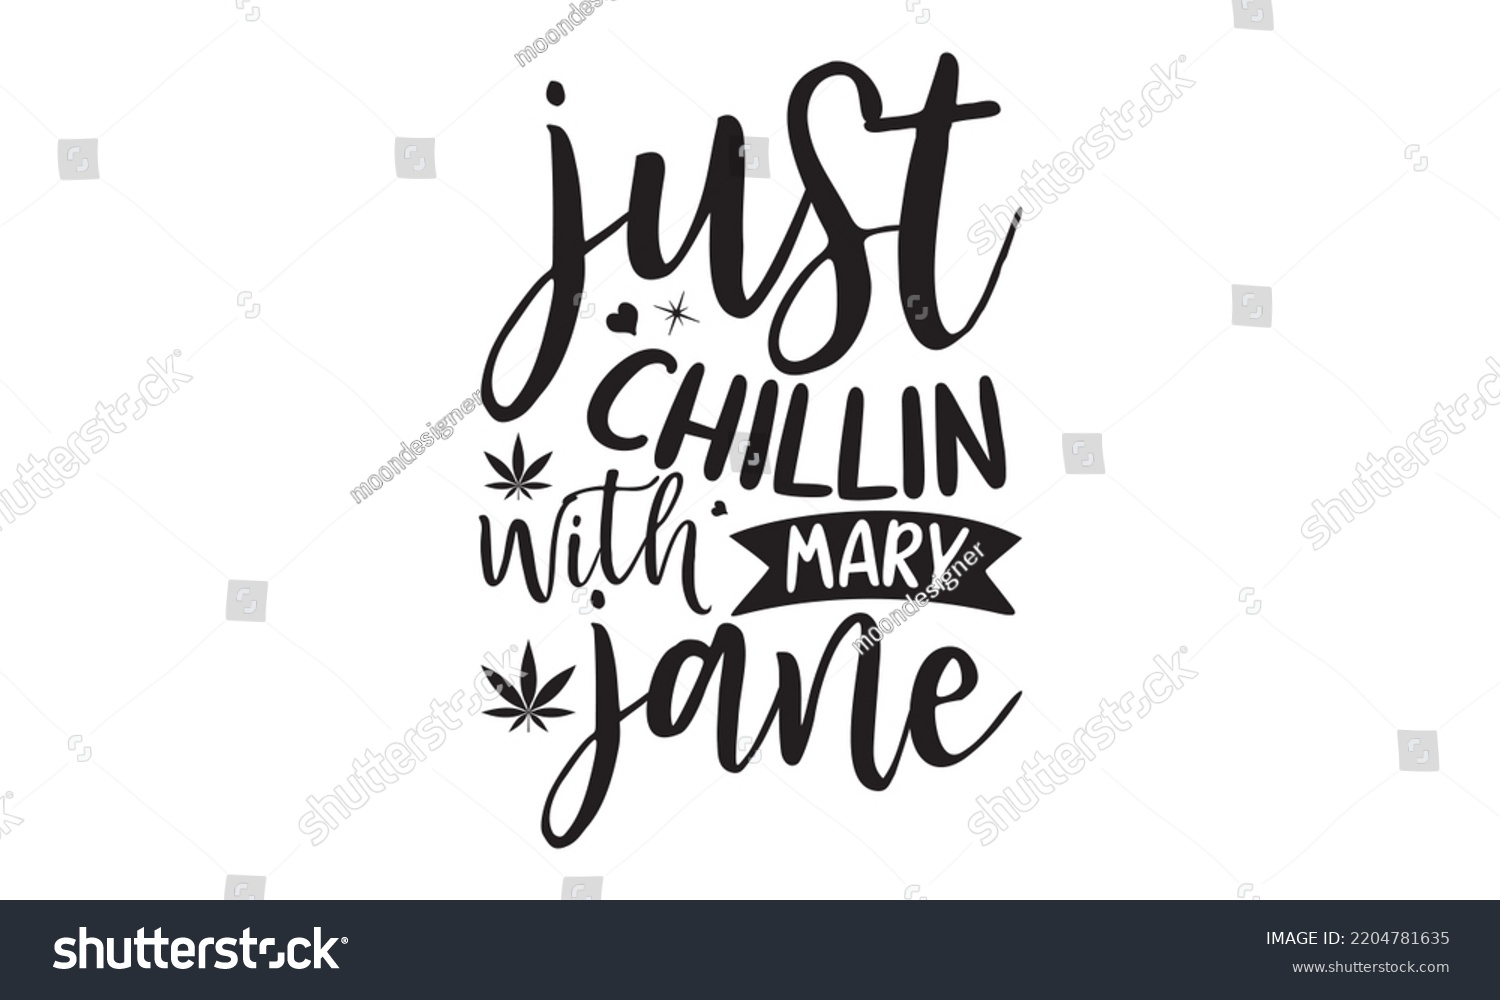 SVG of just chillin with mary jane - Cannabis T-shirt and svg design, merchandise graphics, typography design, svg Files for Cutting and Silhouette, can you download this Design, EPS, 10 svg